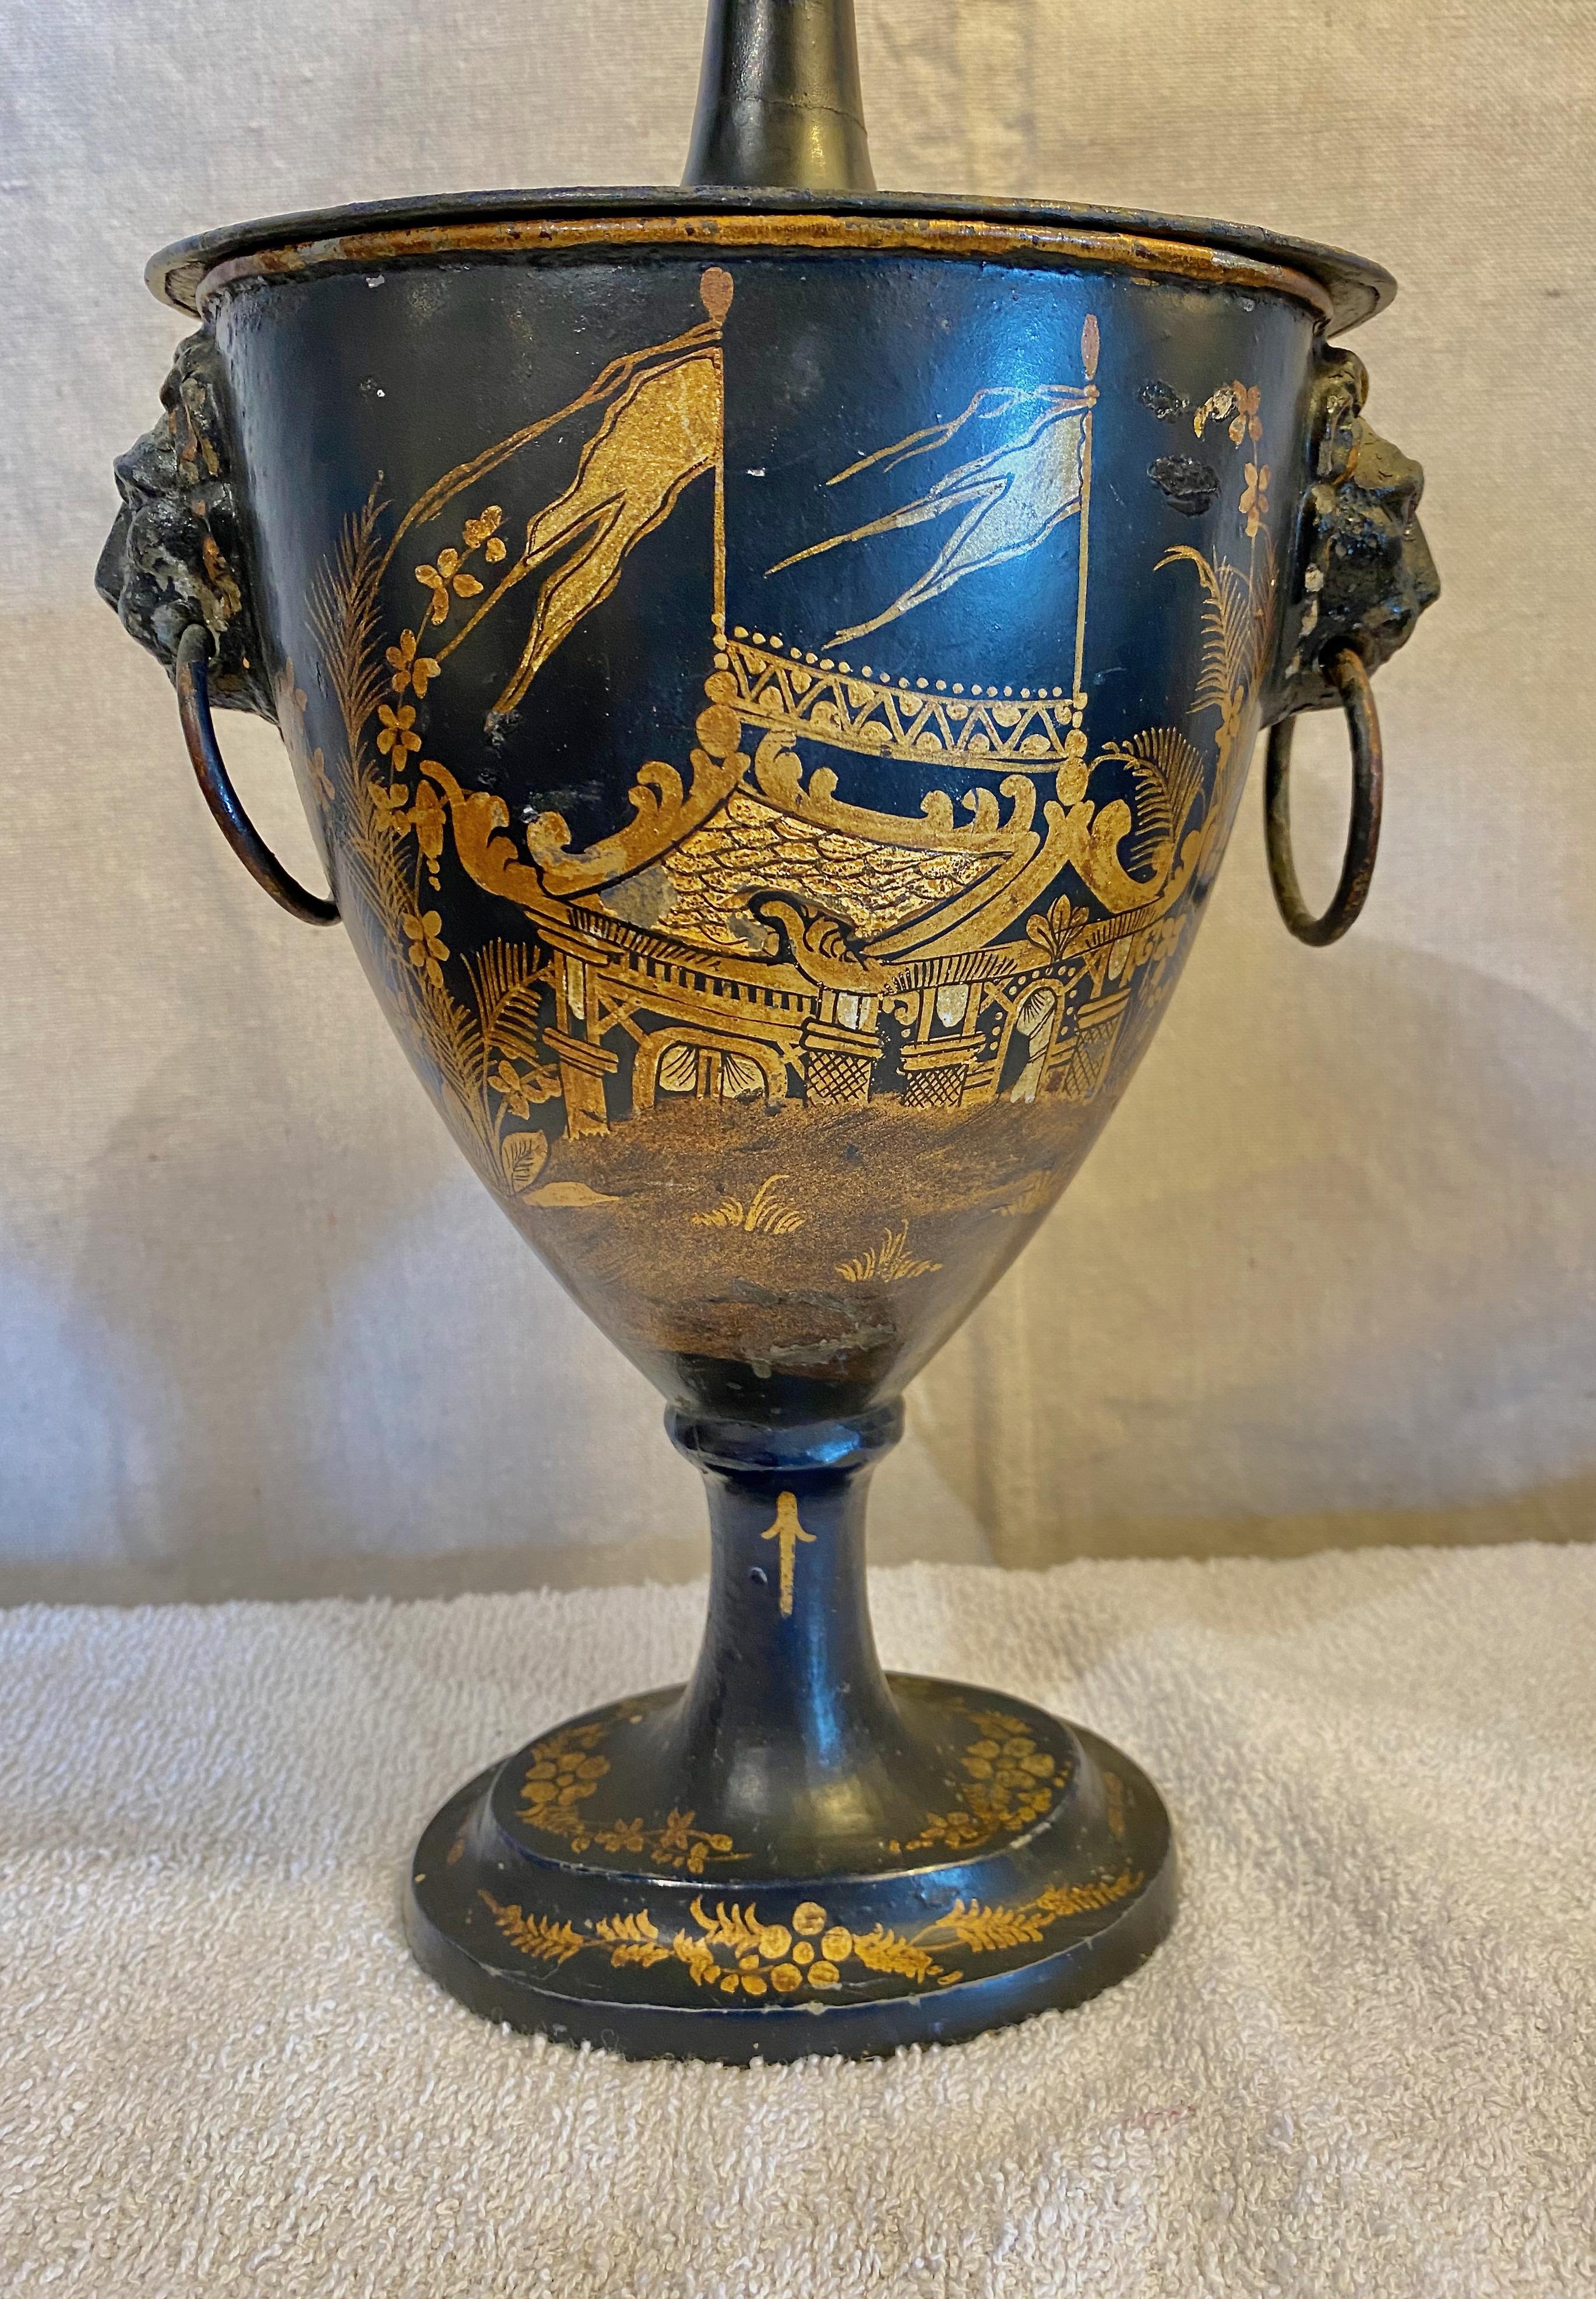 This is a very good example of an early 19th c. Regency Tole Chestnut Urn . The black urn is finely decorated in Chinese motifs with lion head and ring side handles. The painted decoration, which remains in very good condition, depicts naval scenes.